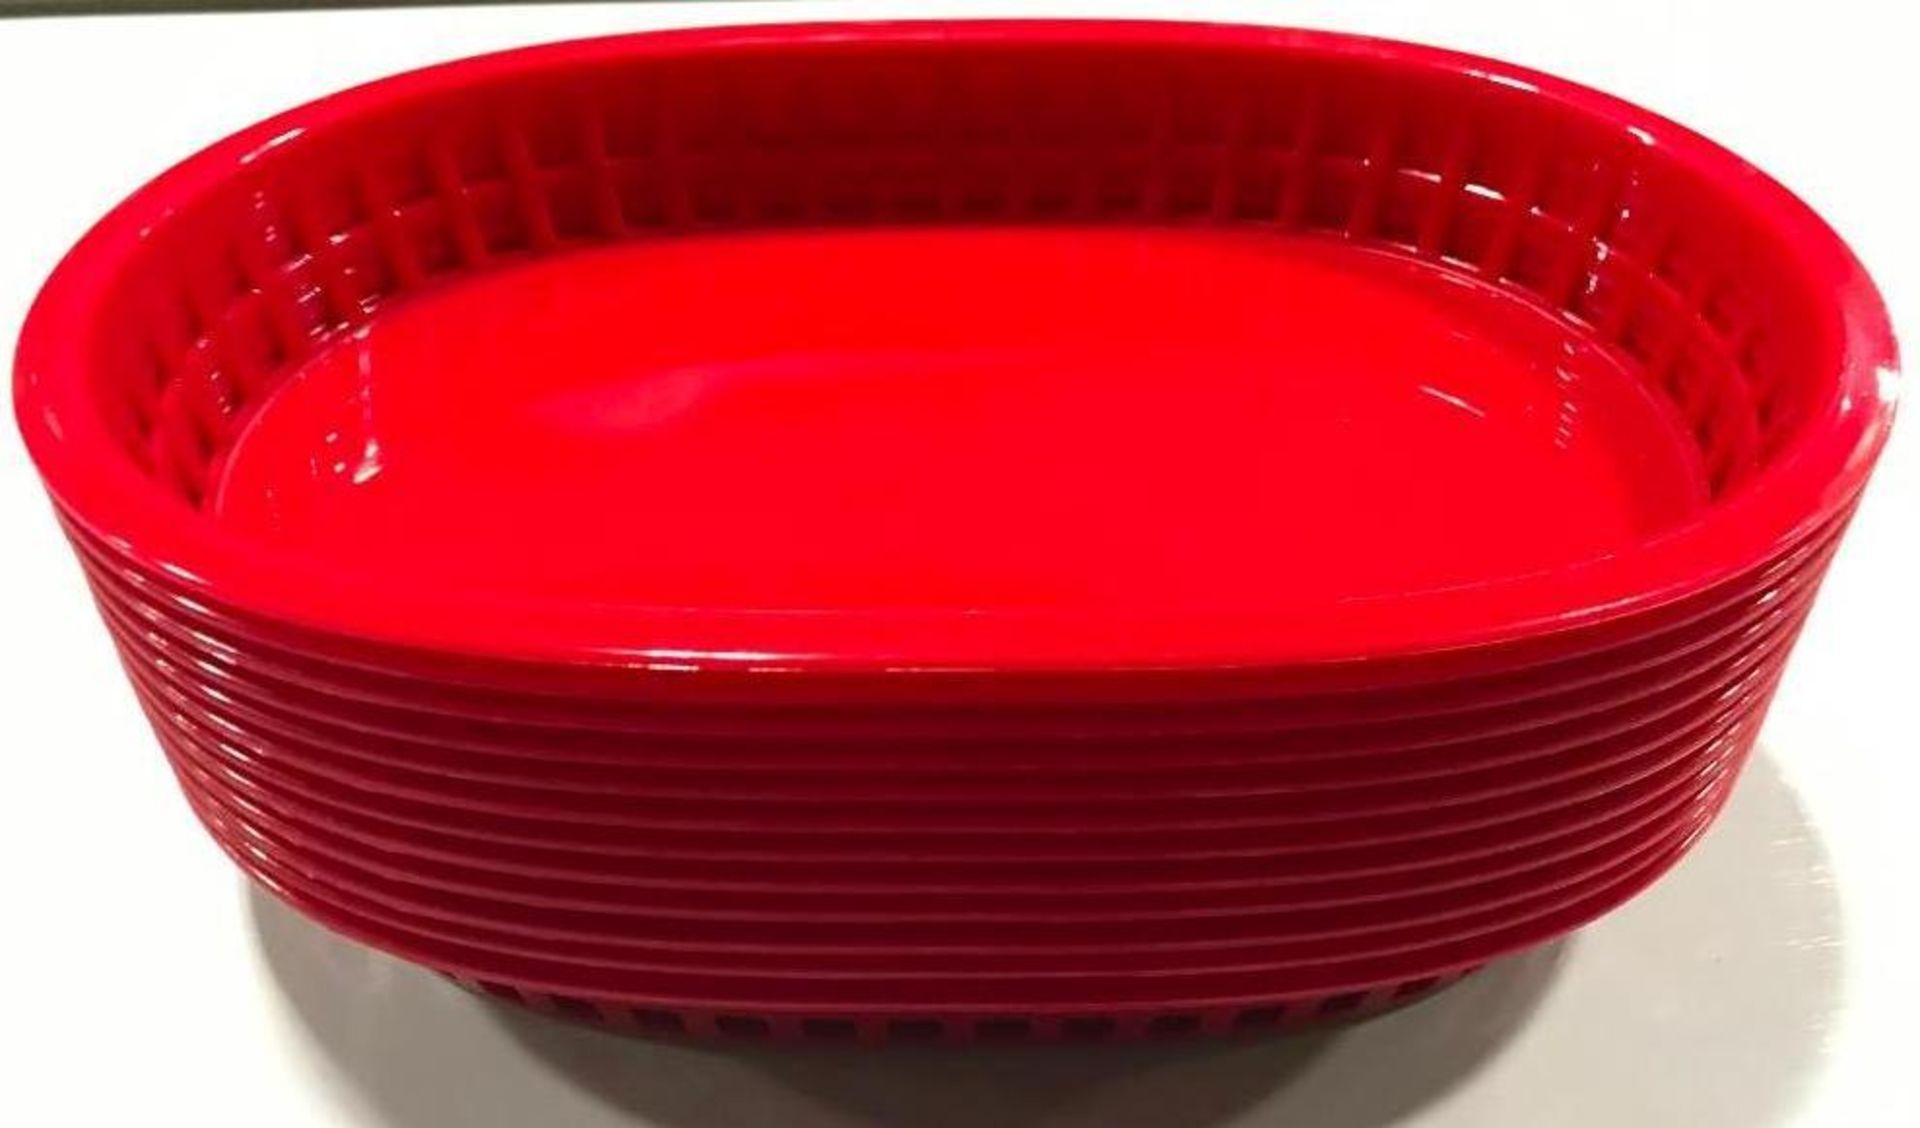 10" OVAL PLASTIC FOOD RED BASKETS, BROWNE 496FR - LOT OF 12